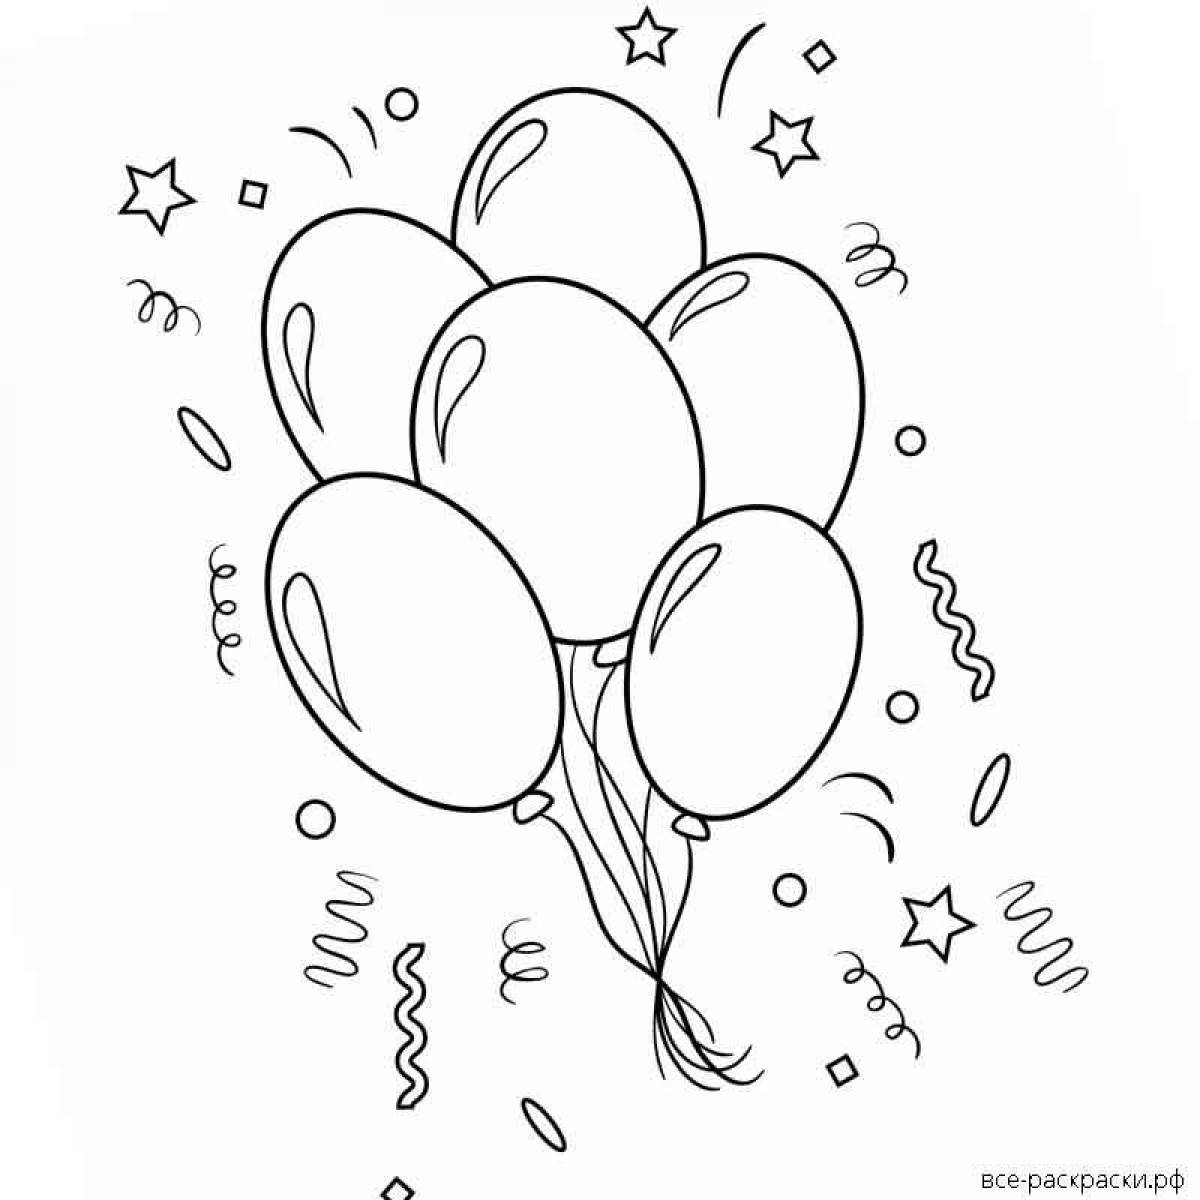 Glowing balloons coloring page